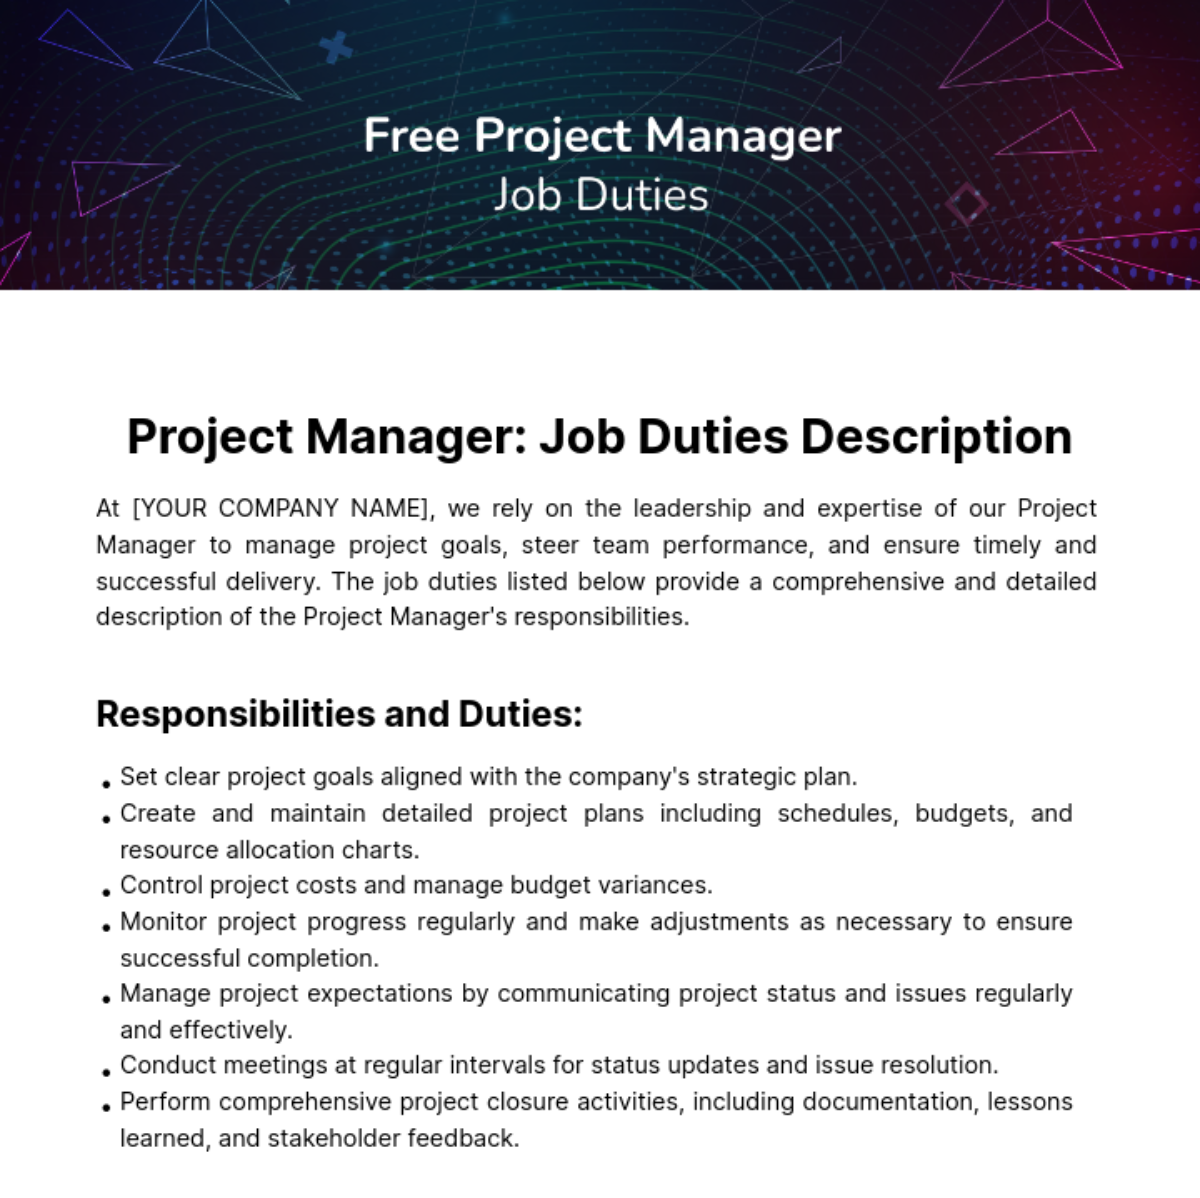 Free Project Manager Job Duties Template